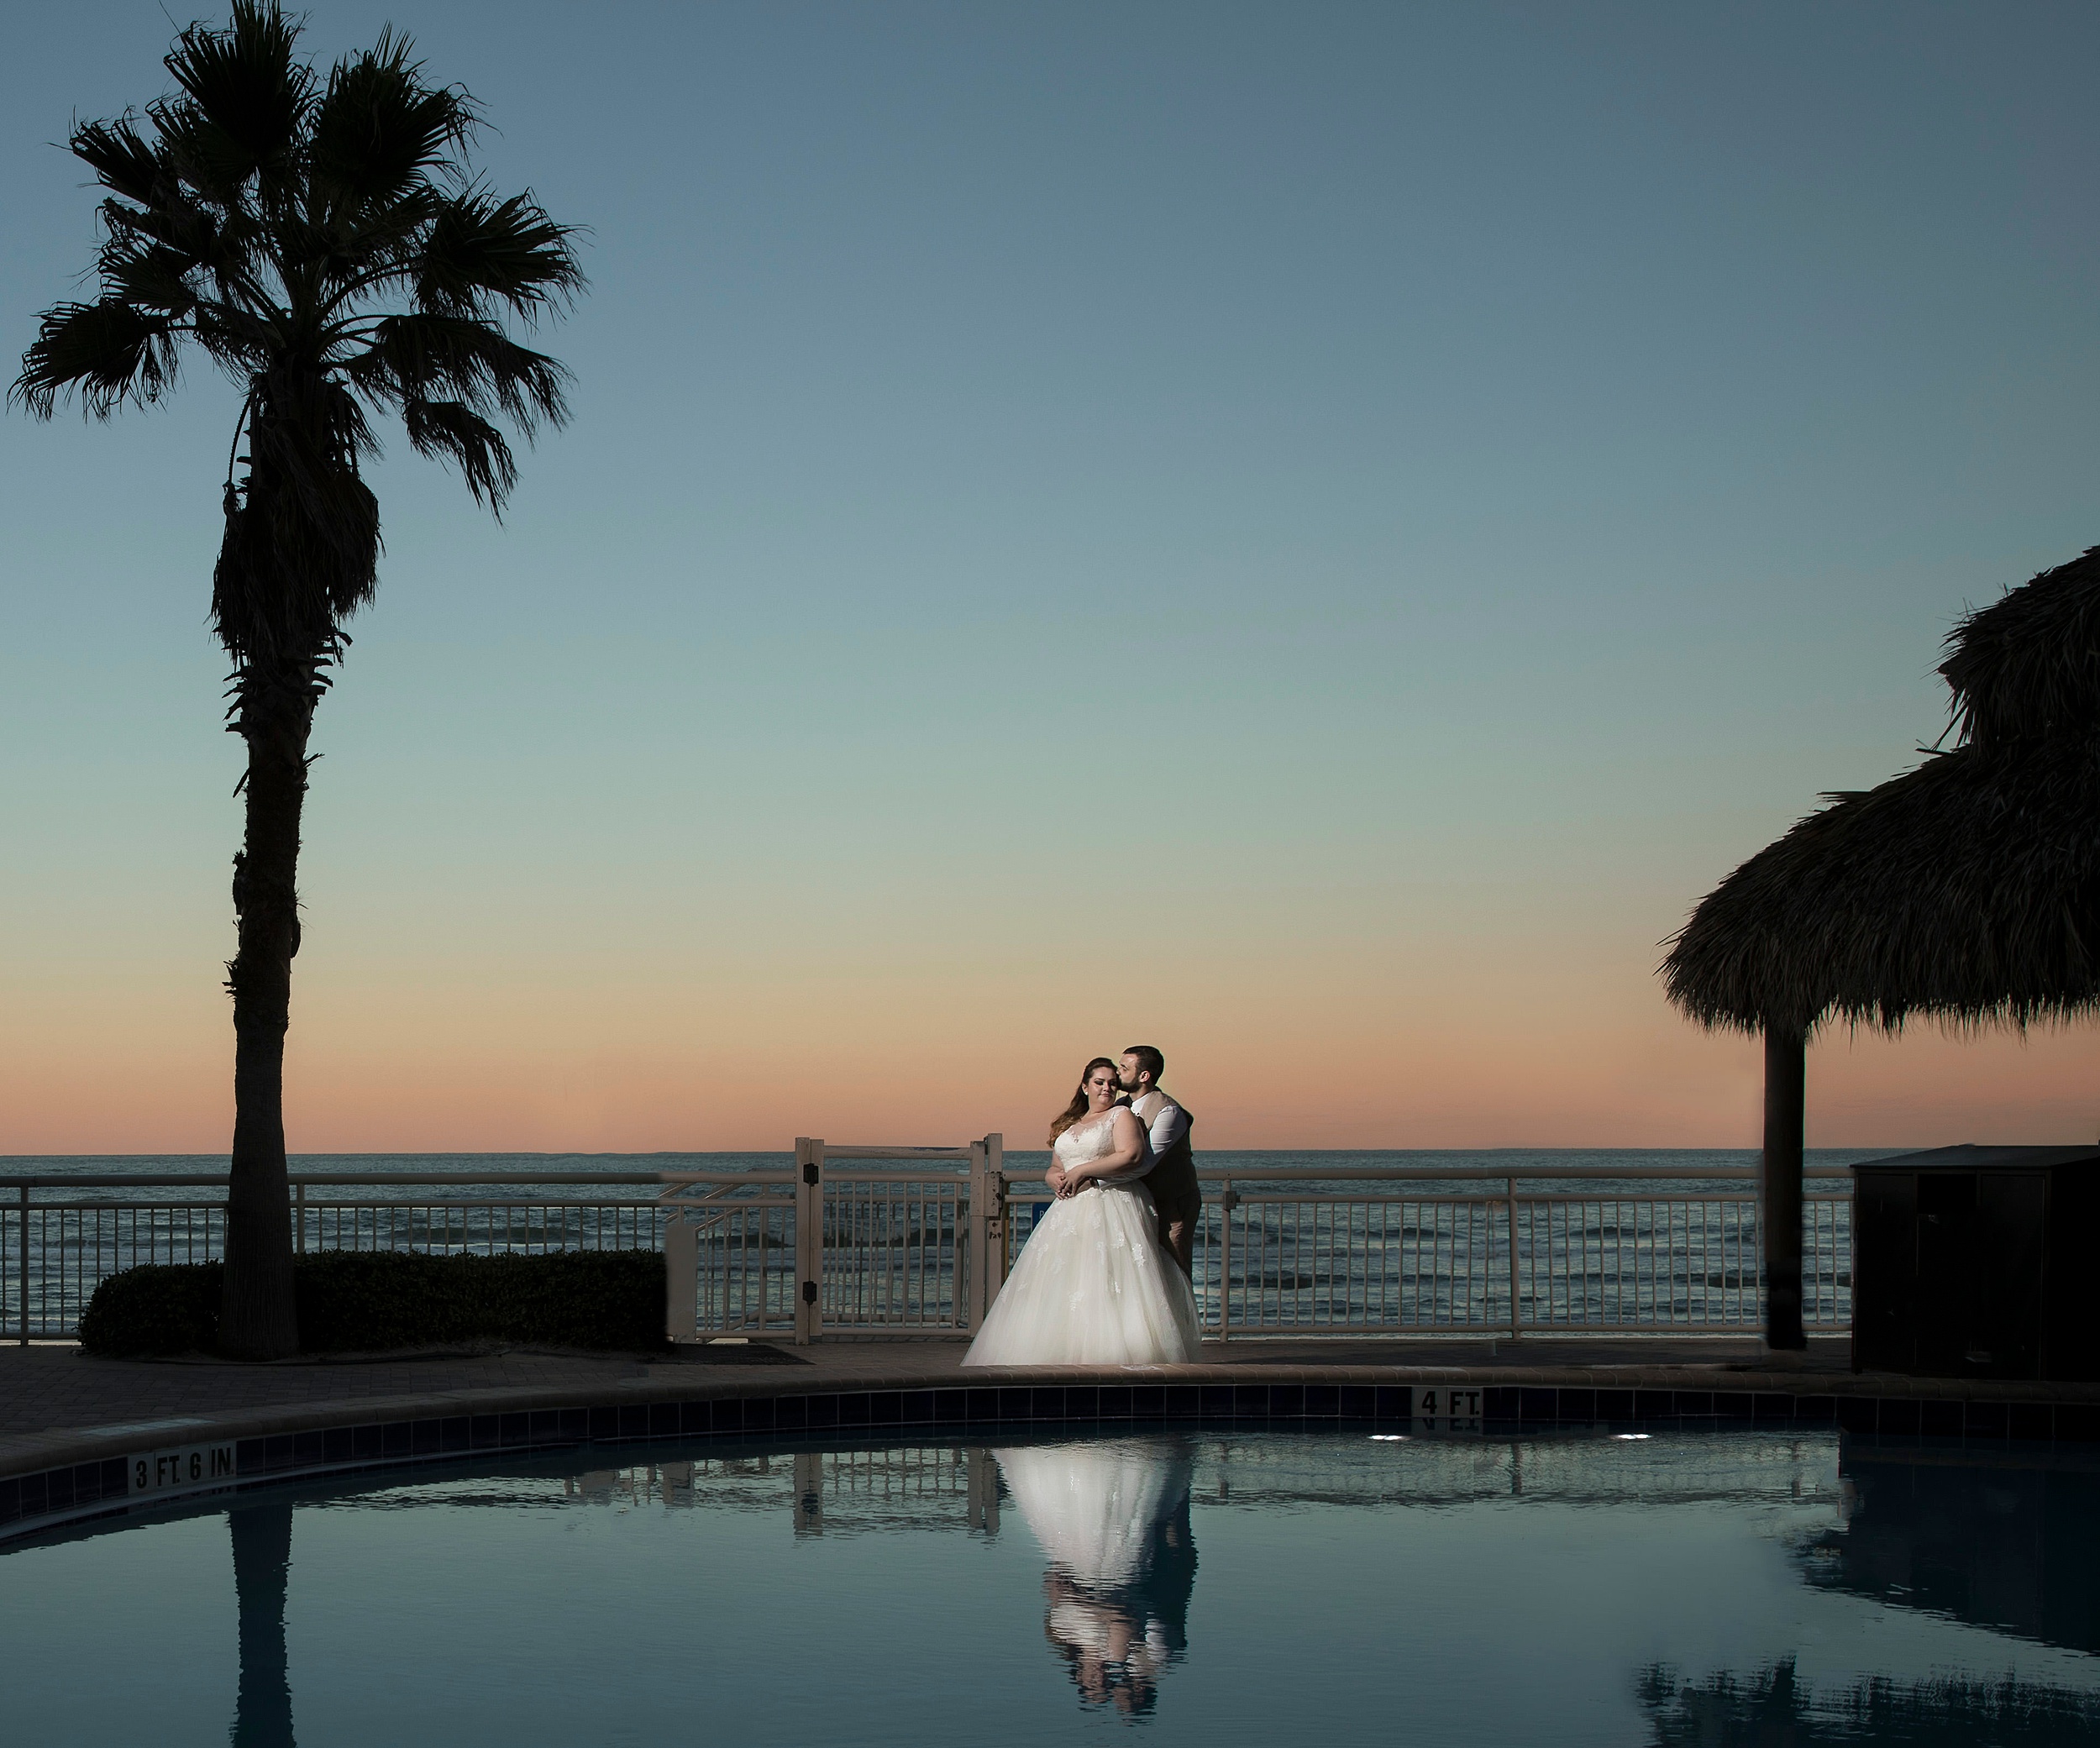 Newlyweds share a quiet poolside moment together at a beachfront hotel at sunset